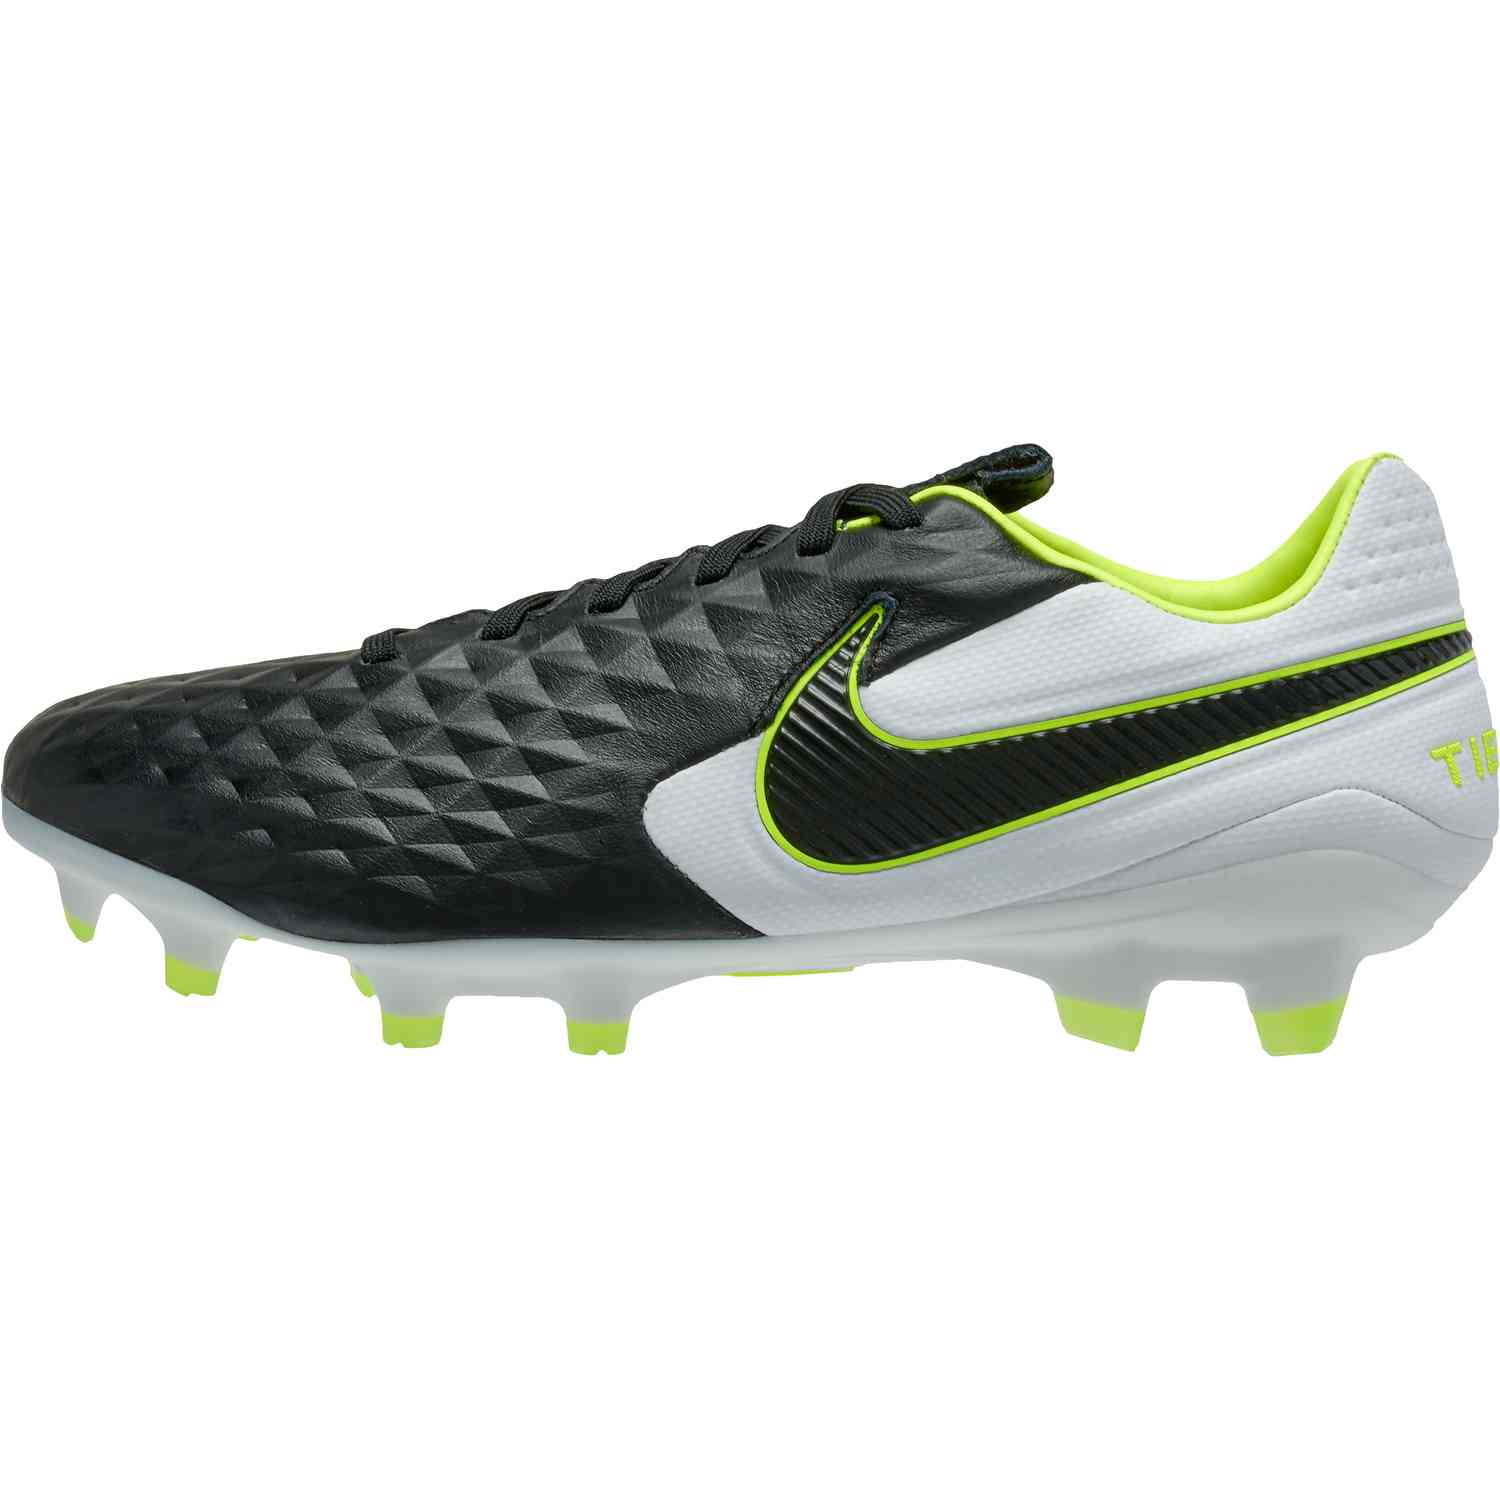 Nike Tiempo Legend 8 Feature Review Soccer Cleats 101